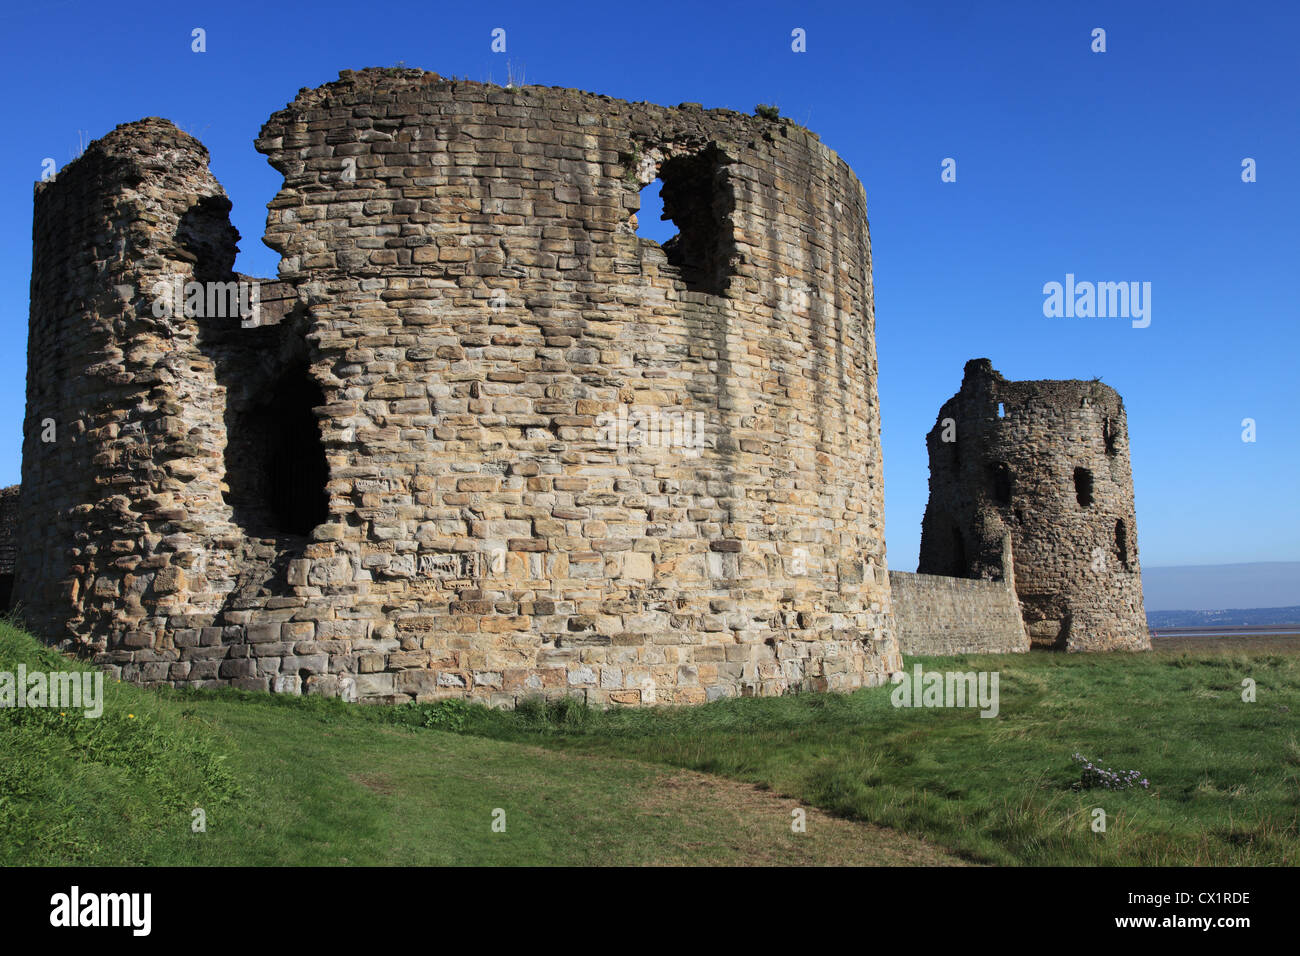 The ruins of 13th century Flint castle north east Wales UK Stock Photo